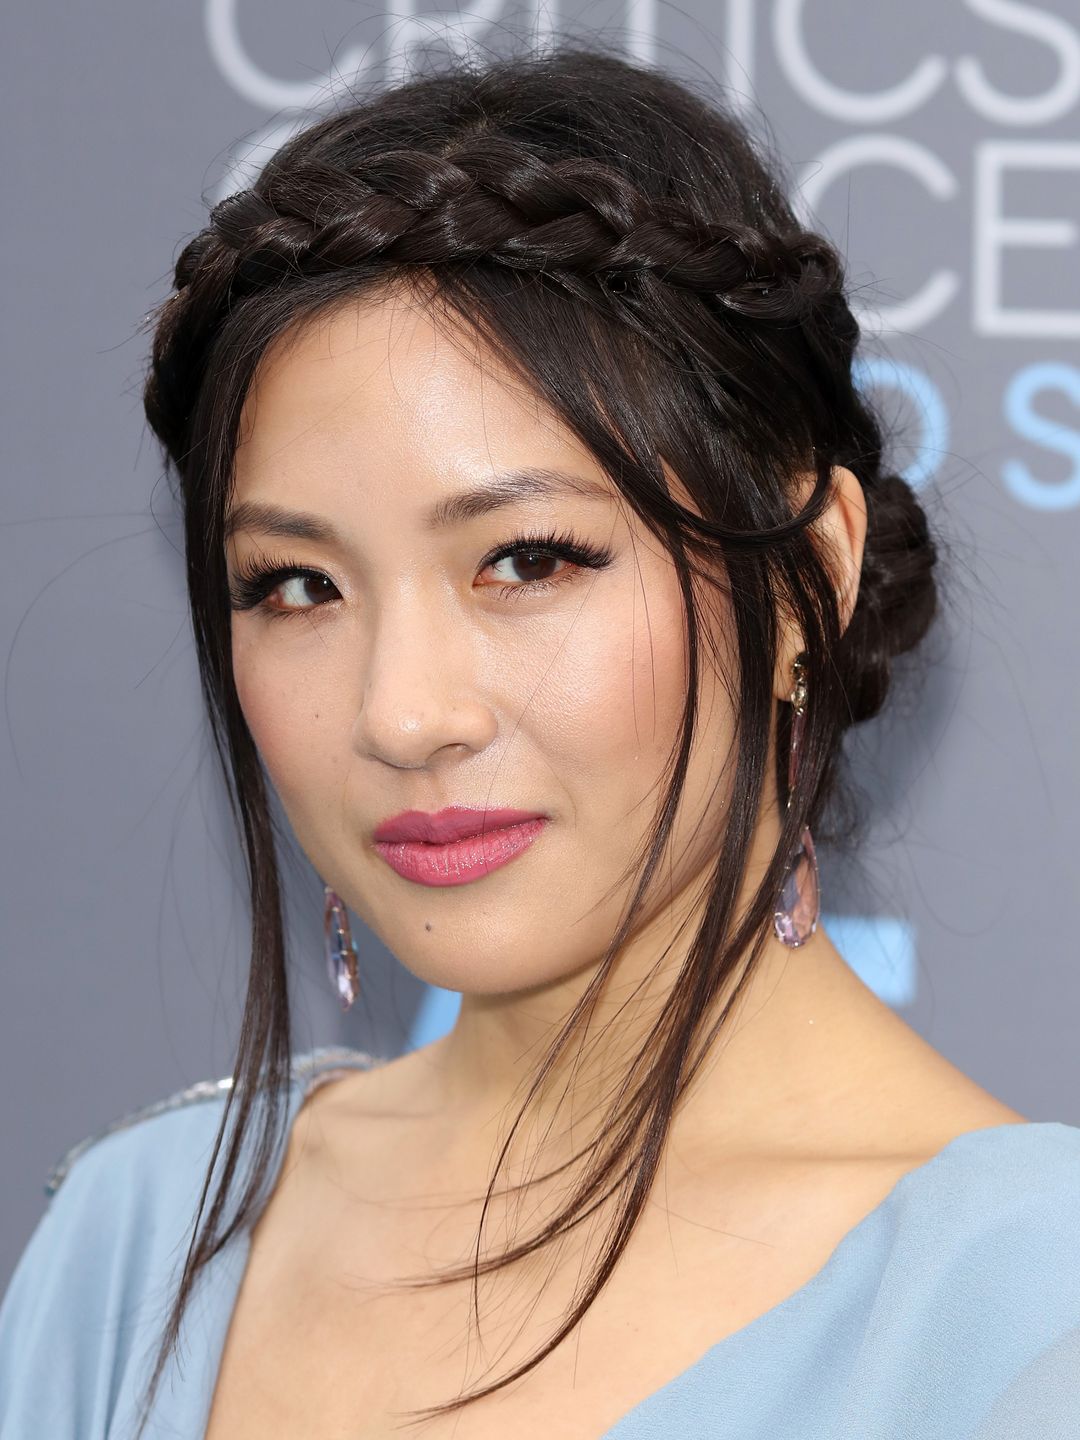 Constance Wu personal life